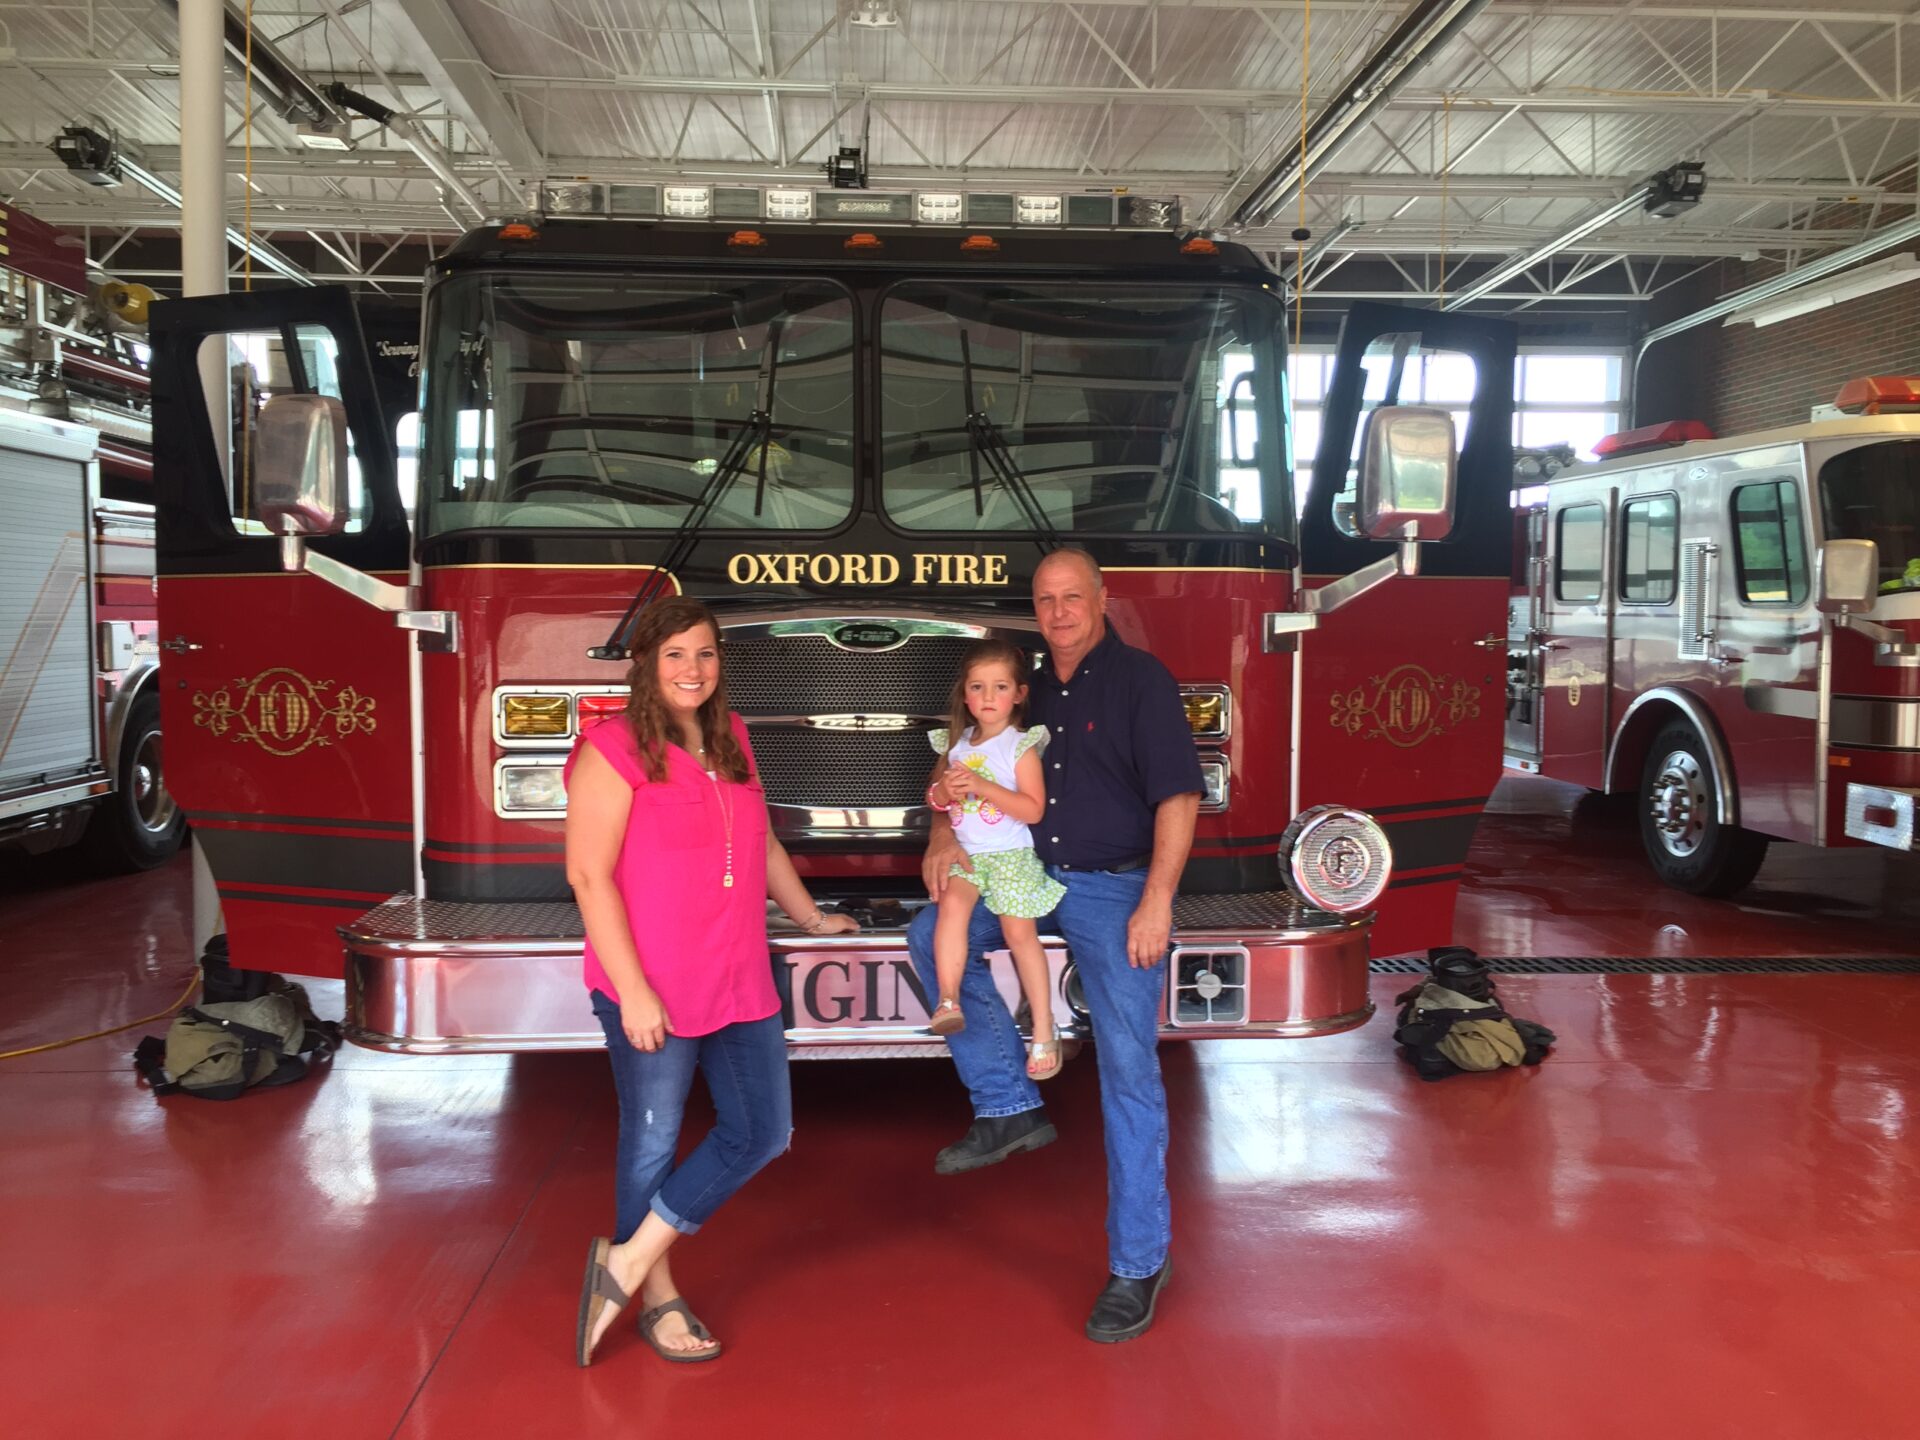 Levy's granddaughter, Gracie, had her birthday party at the station this year.